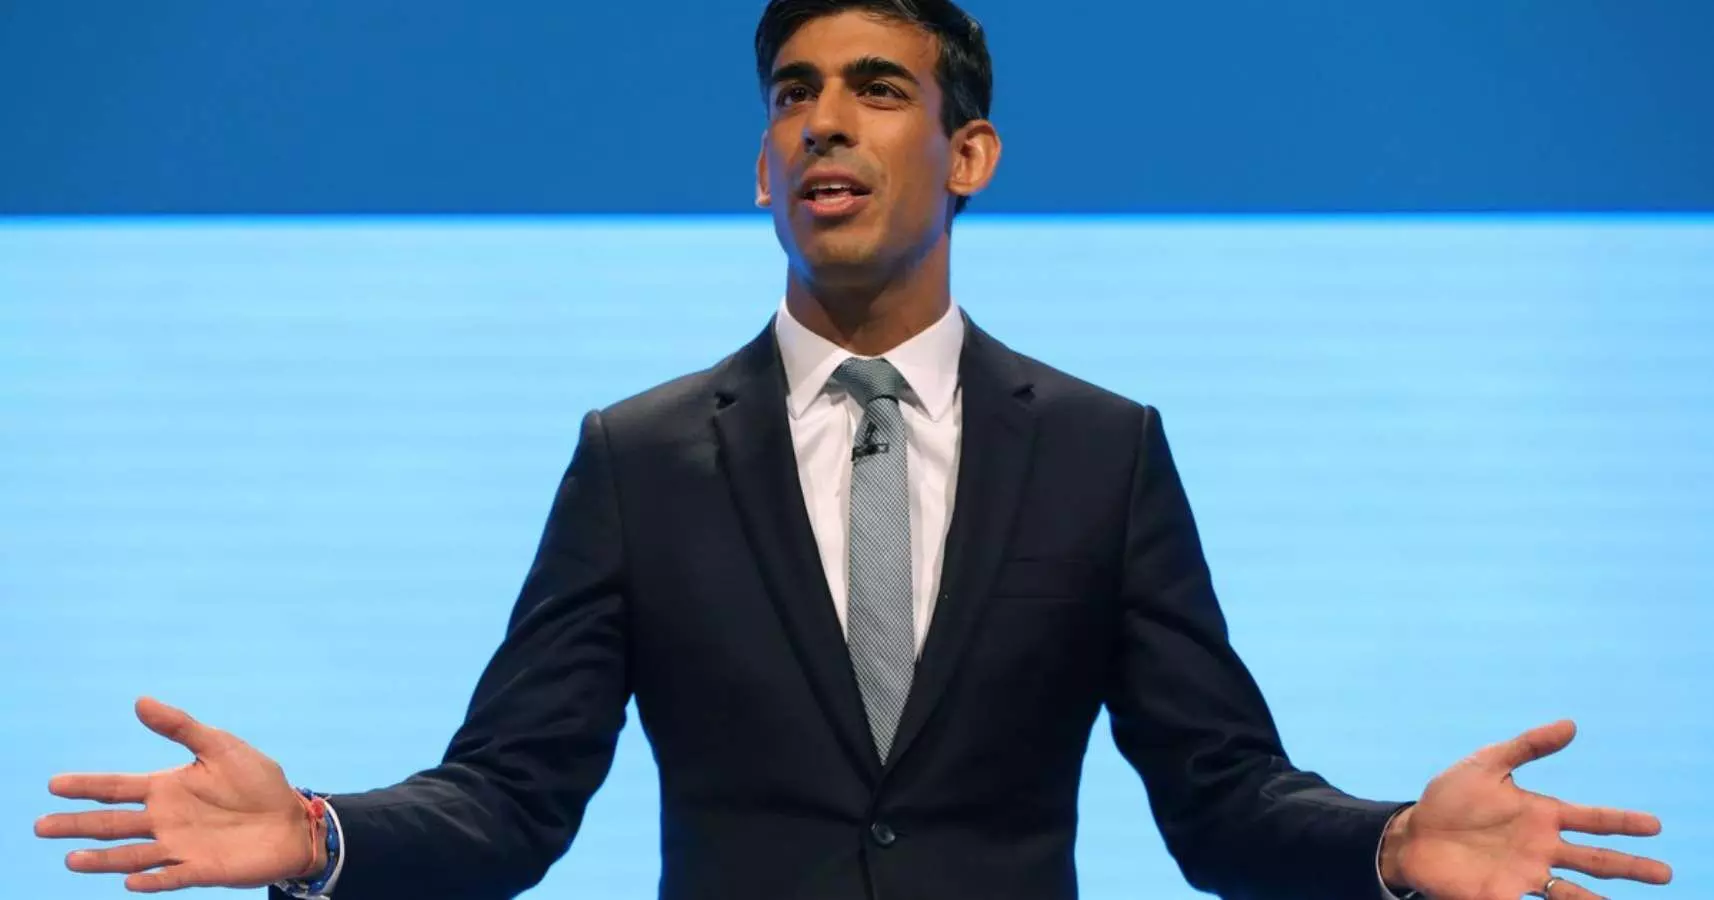 rishi sunak will contest the prime minister election of uk said i want to do something for britain